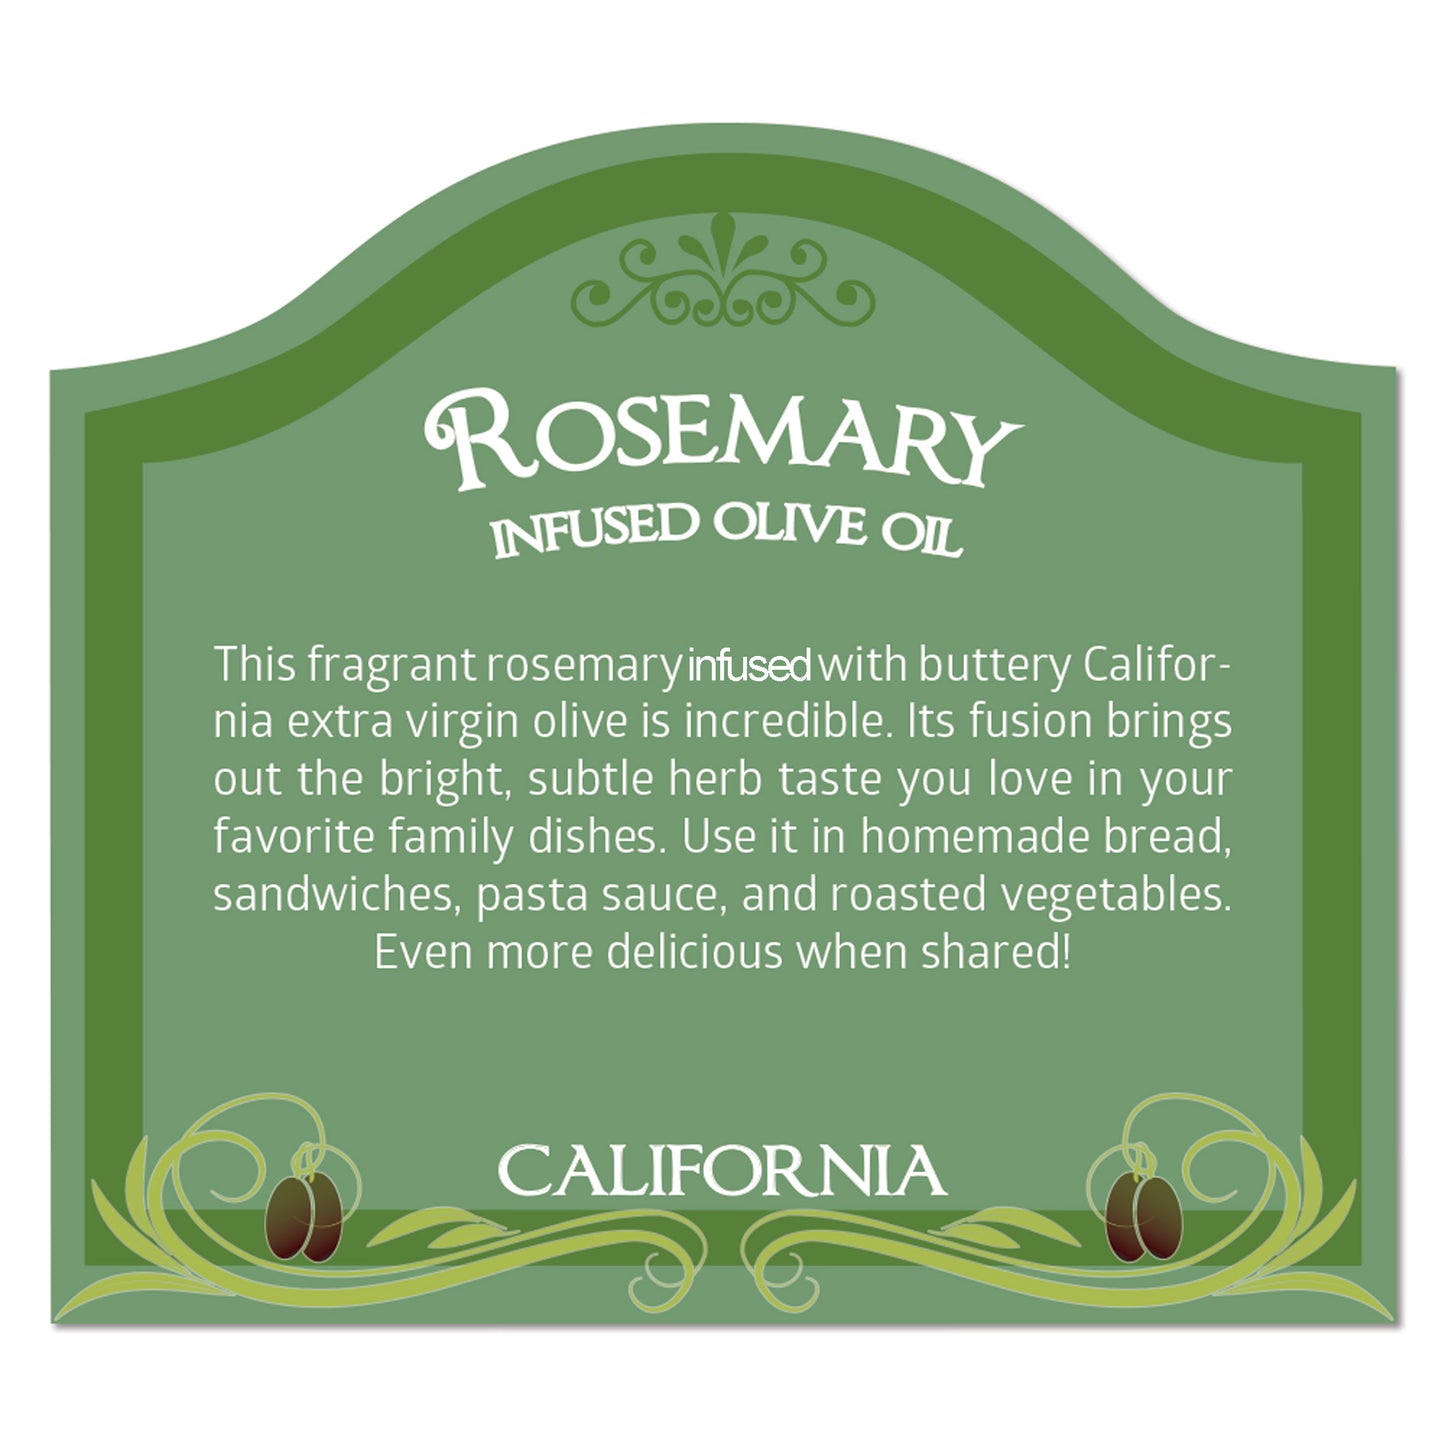 ROSEMARY Infused Olive Oil - California